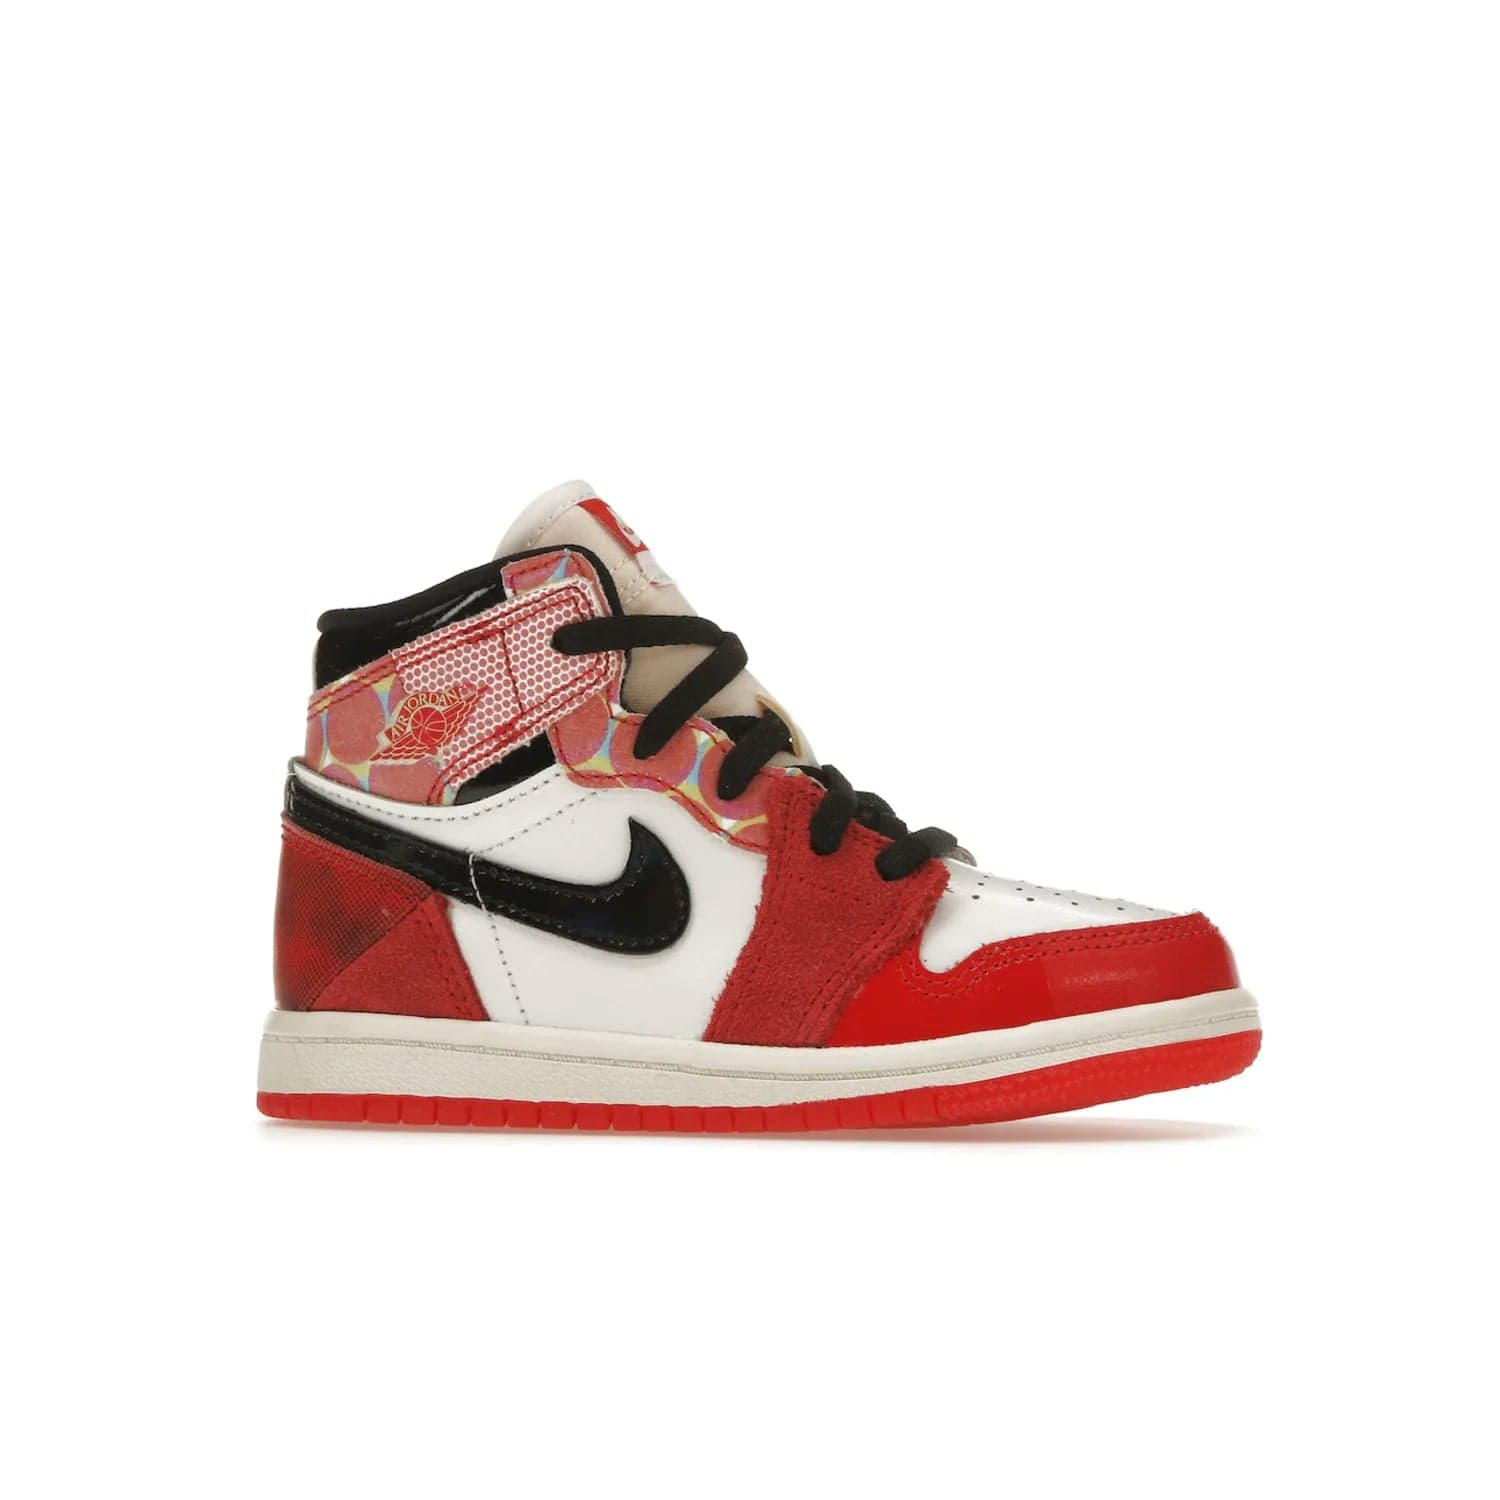 Jordan 1 High OG Spider-Man Across the Spider-Verse (TD) - Image 2 - Only at www.BallersClubKickz.com - The University Red/Black/White Spider-Man Across the Spider-Verse Air Jordan 1 High OG features bold accents and an eye-catching design. Releasing May 2023.